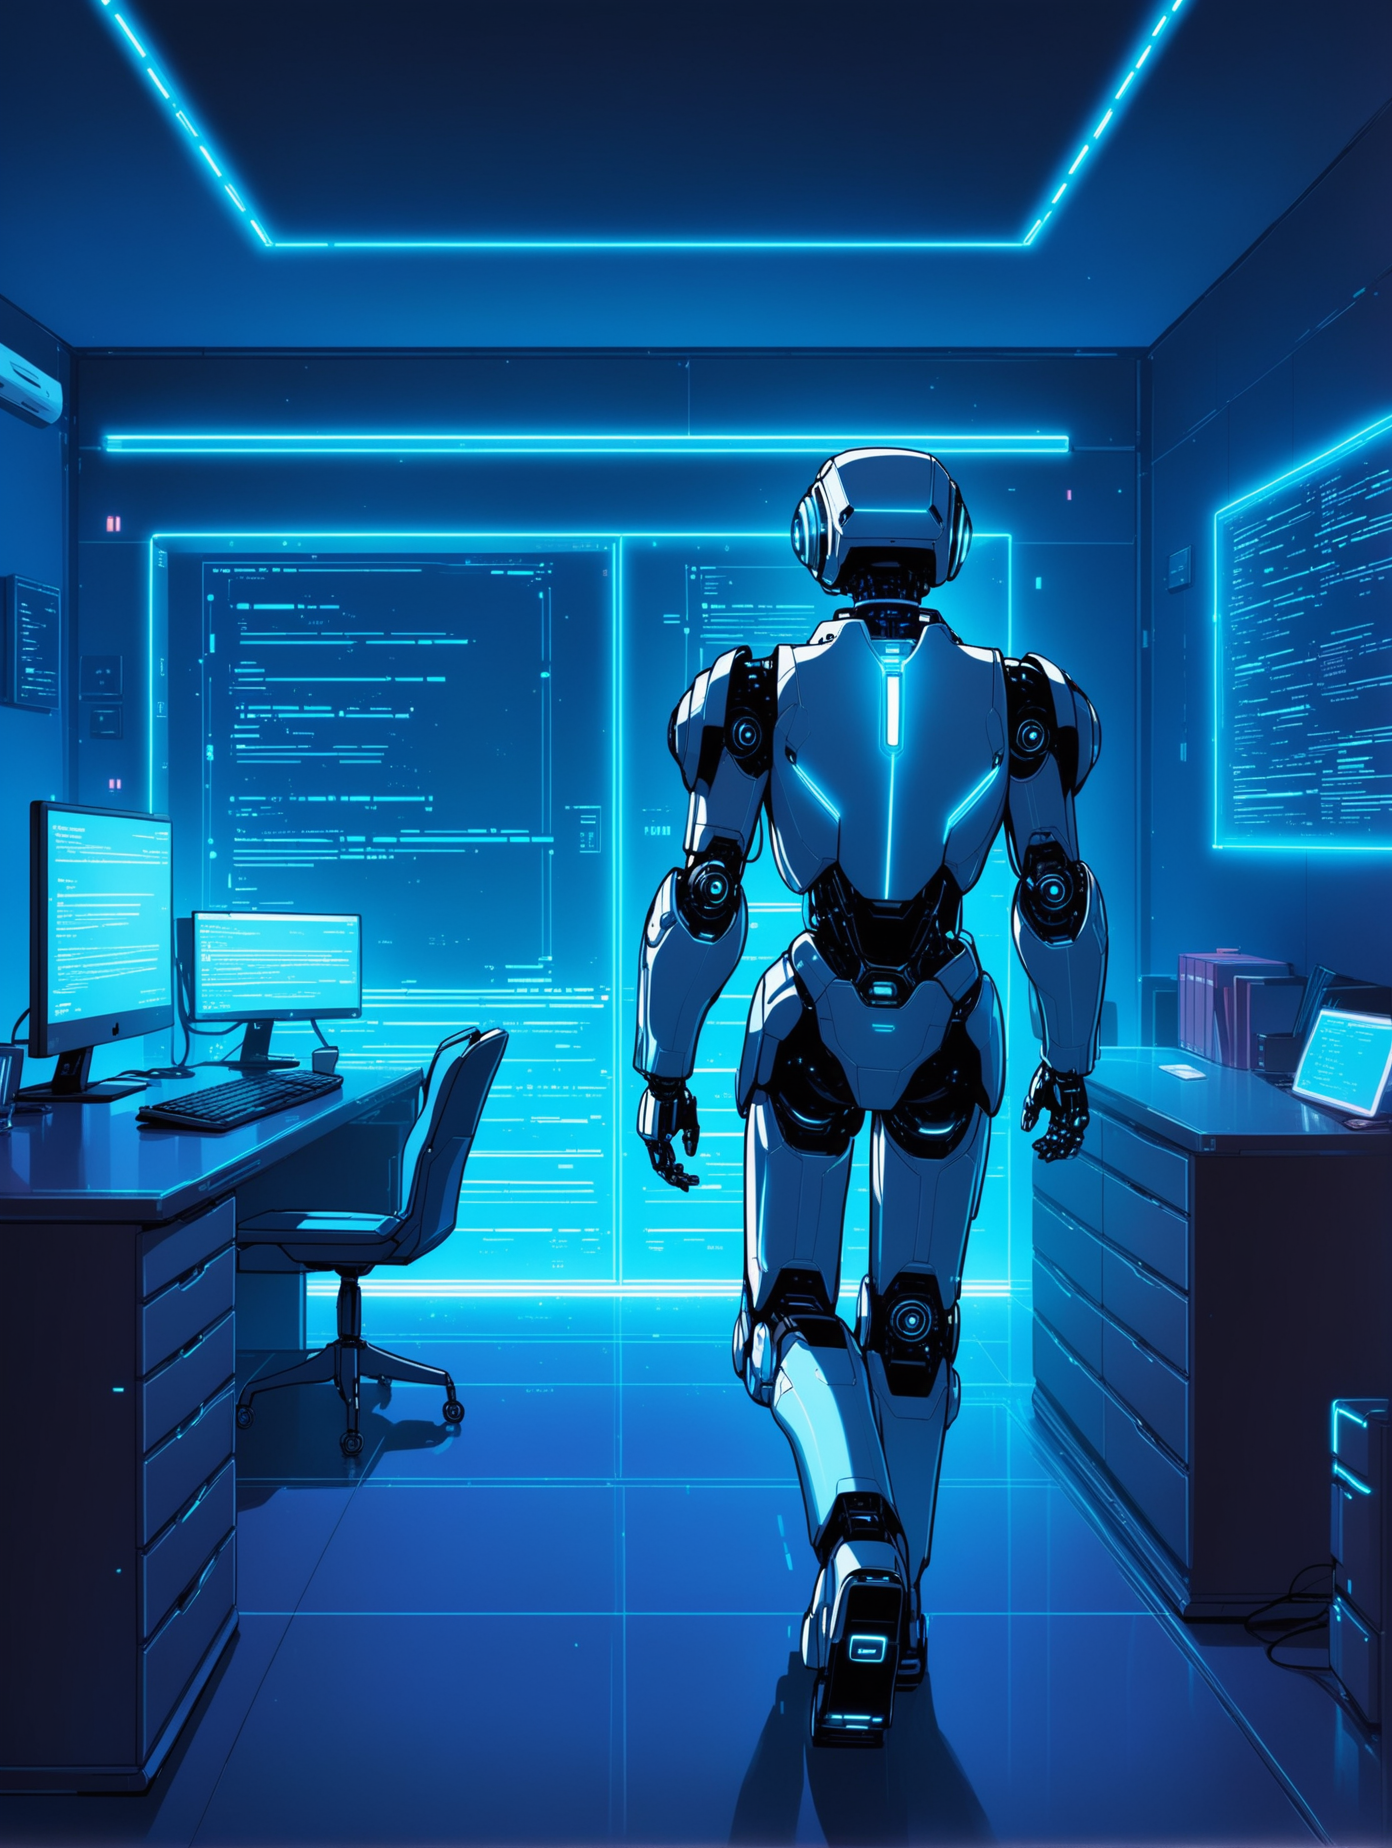 ai bot, walking to his desk to start coding 
He's in his bedroom sat at his desk
The bedroom has a high tech aesthetic with blue lights